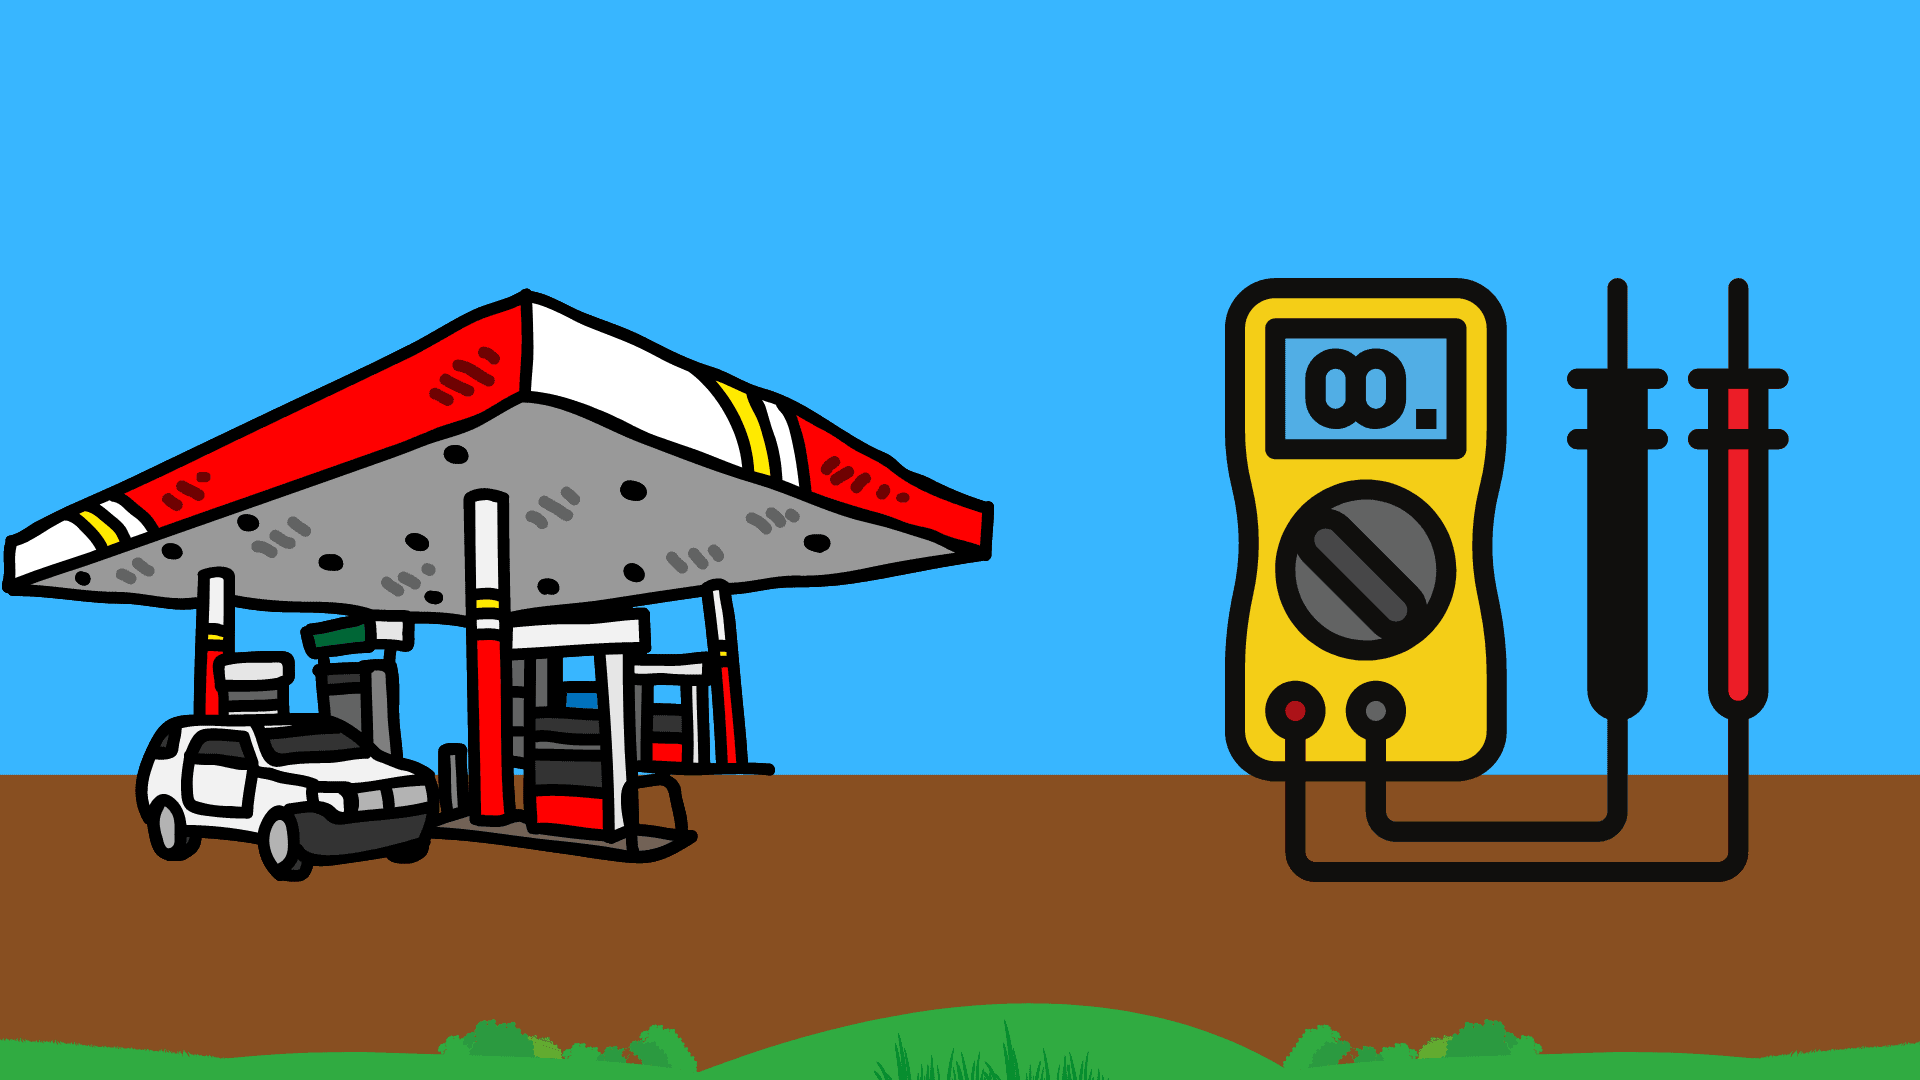 How To Test Fuel Pump With Multimeter